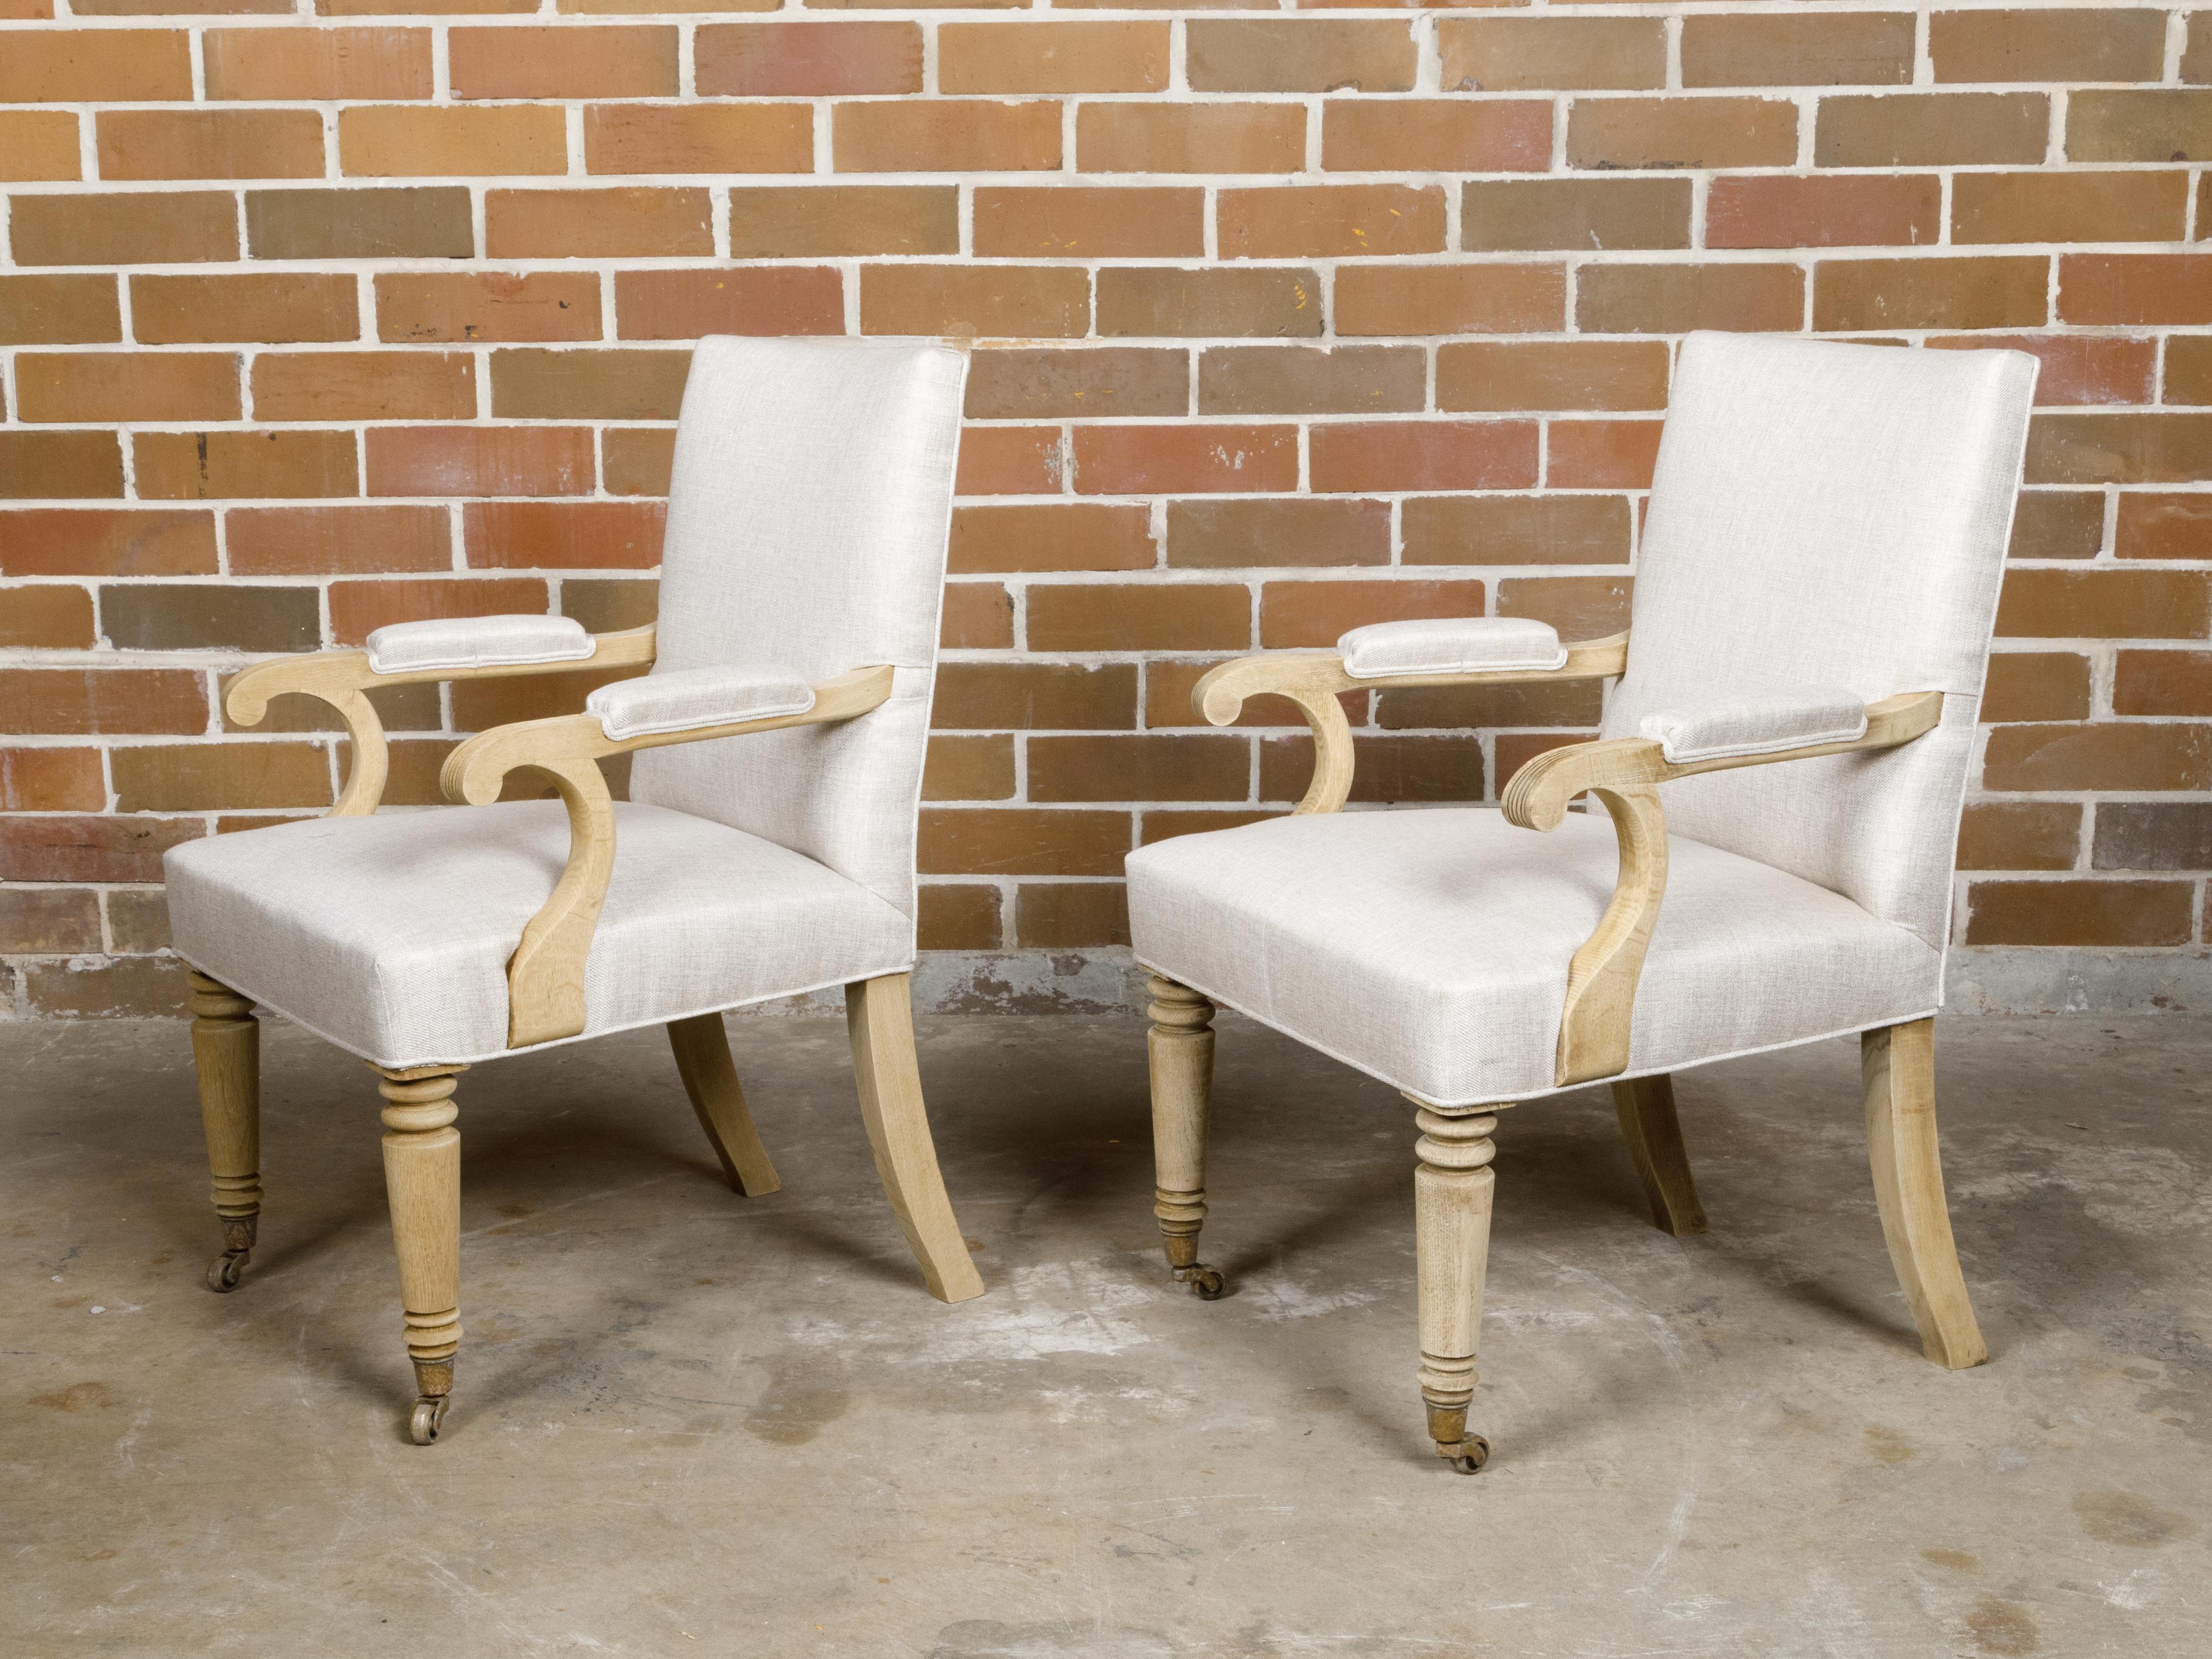 Turn of the Century English 1900s Bleached Armchairs with Linen Upholstery, Pair For Sale 5